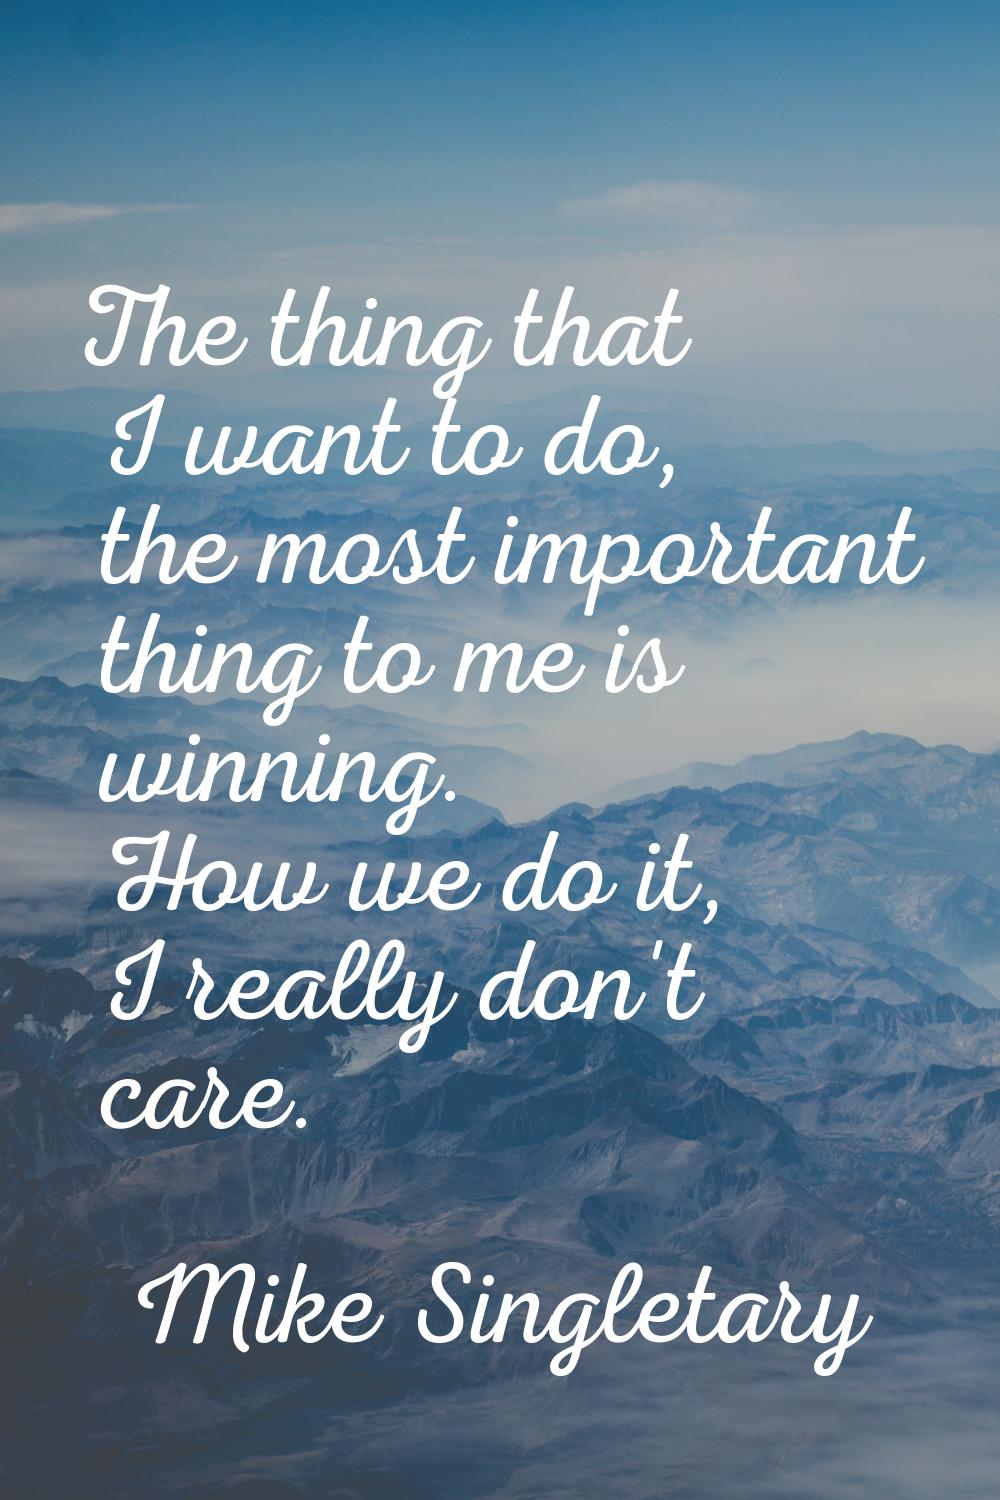 The thing that I want to do, the most important thing to me is winning. How we do it, I really don'